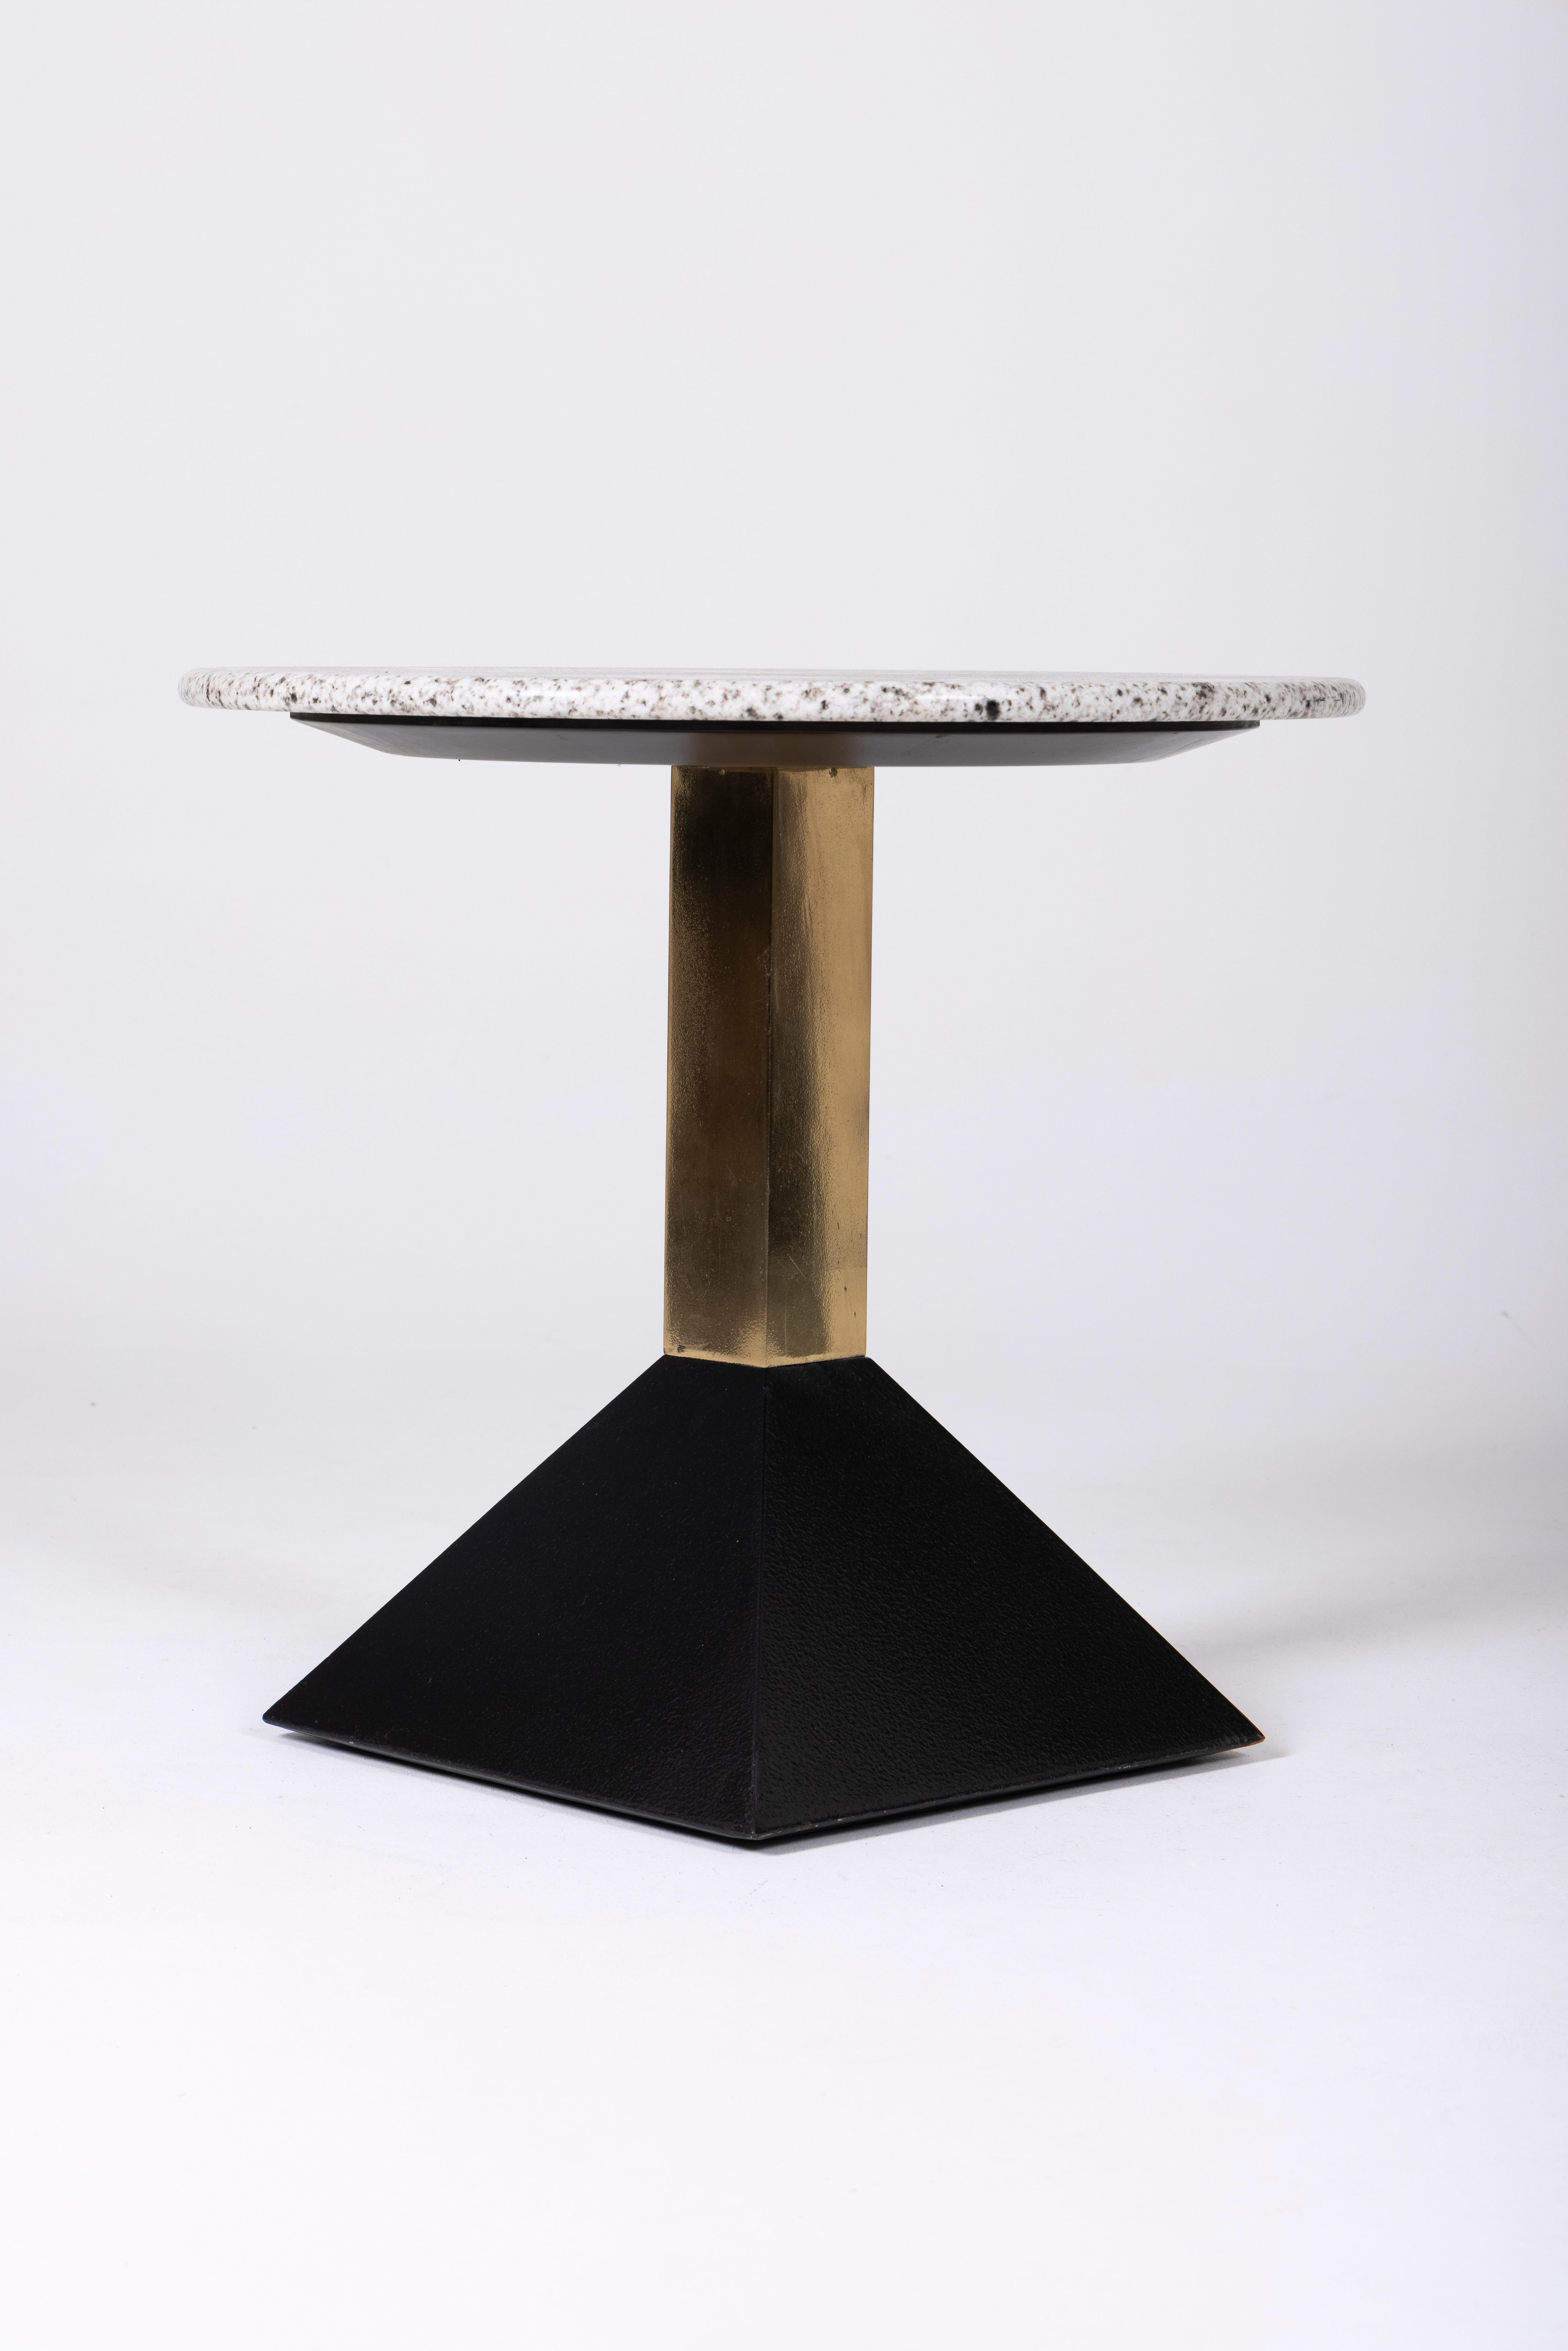 20th Century Side table or pedestal table in Memphis granite For Sale